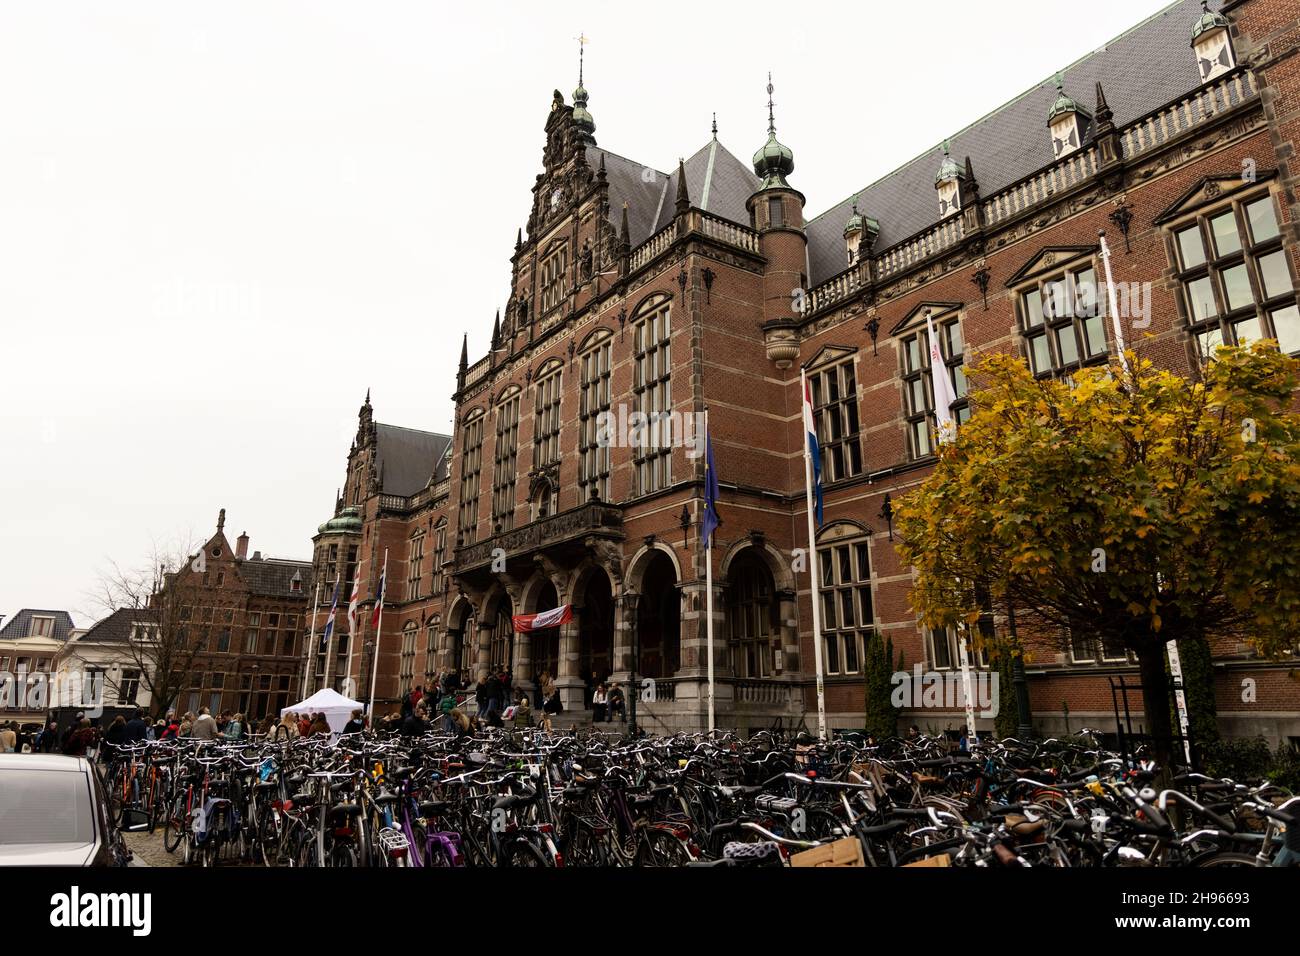 The Academy Building houses the administration of the University of Groningen in the Netherlands. Parking for student bikes spans the front. Stock Photo